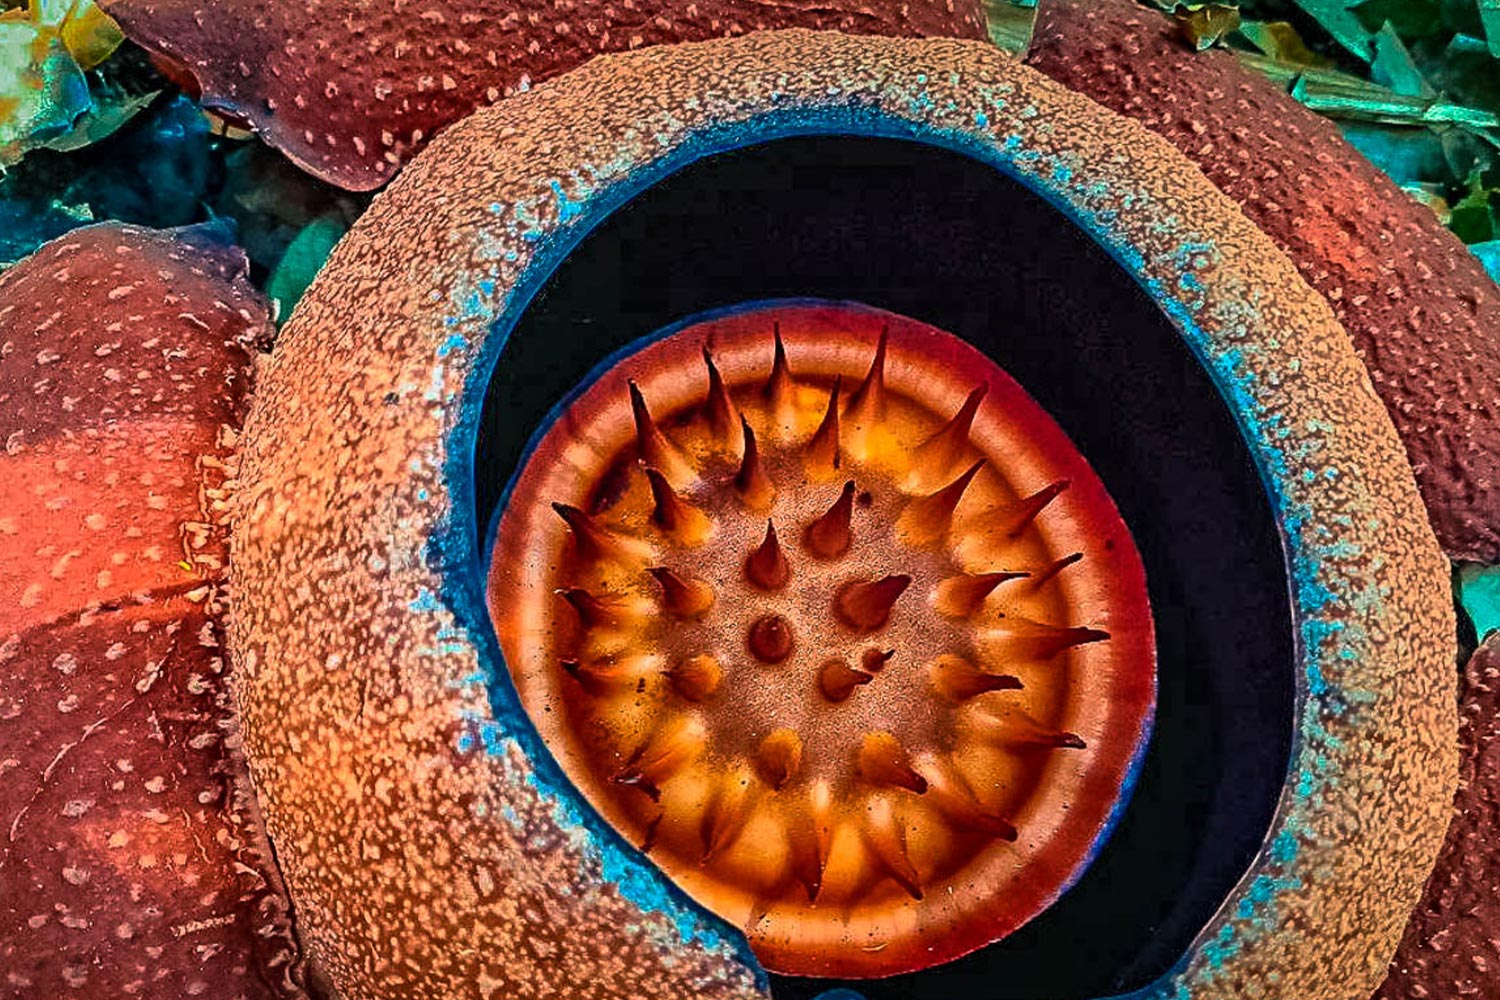 trek to discover the rafflesia, the biggest flower in the world